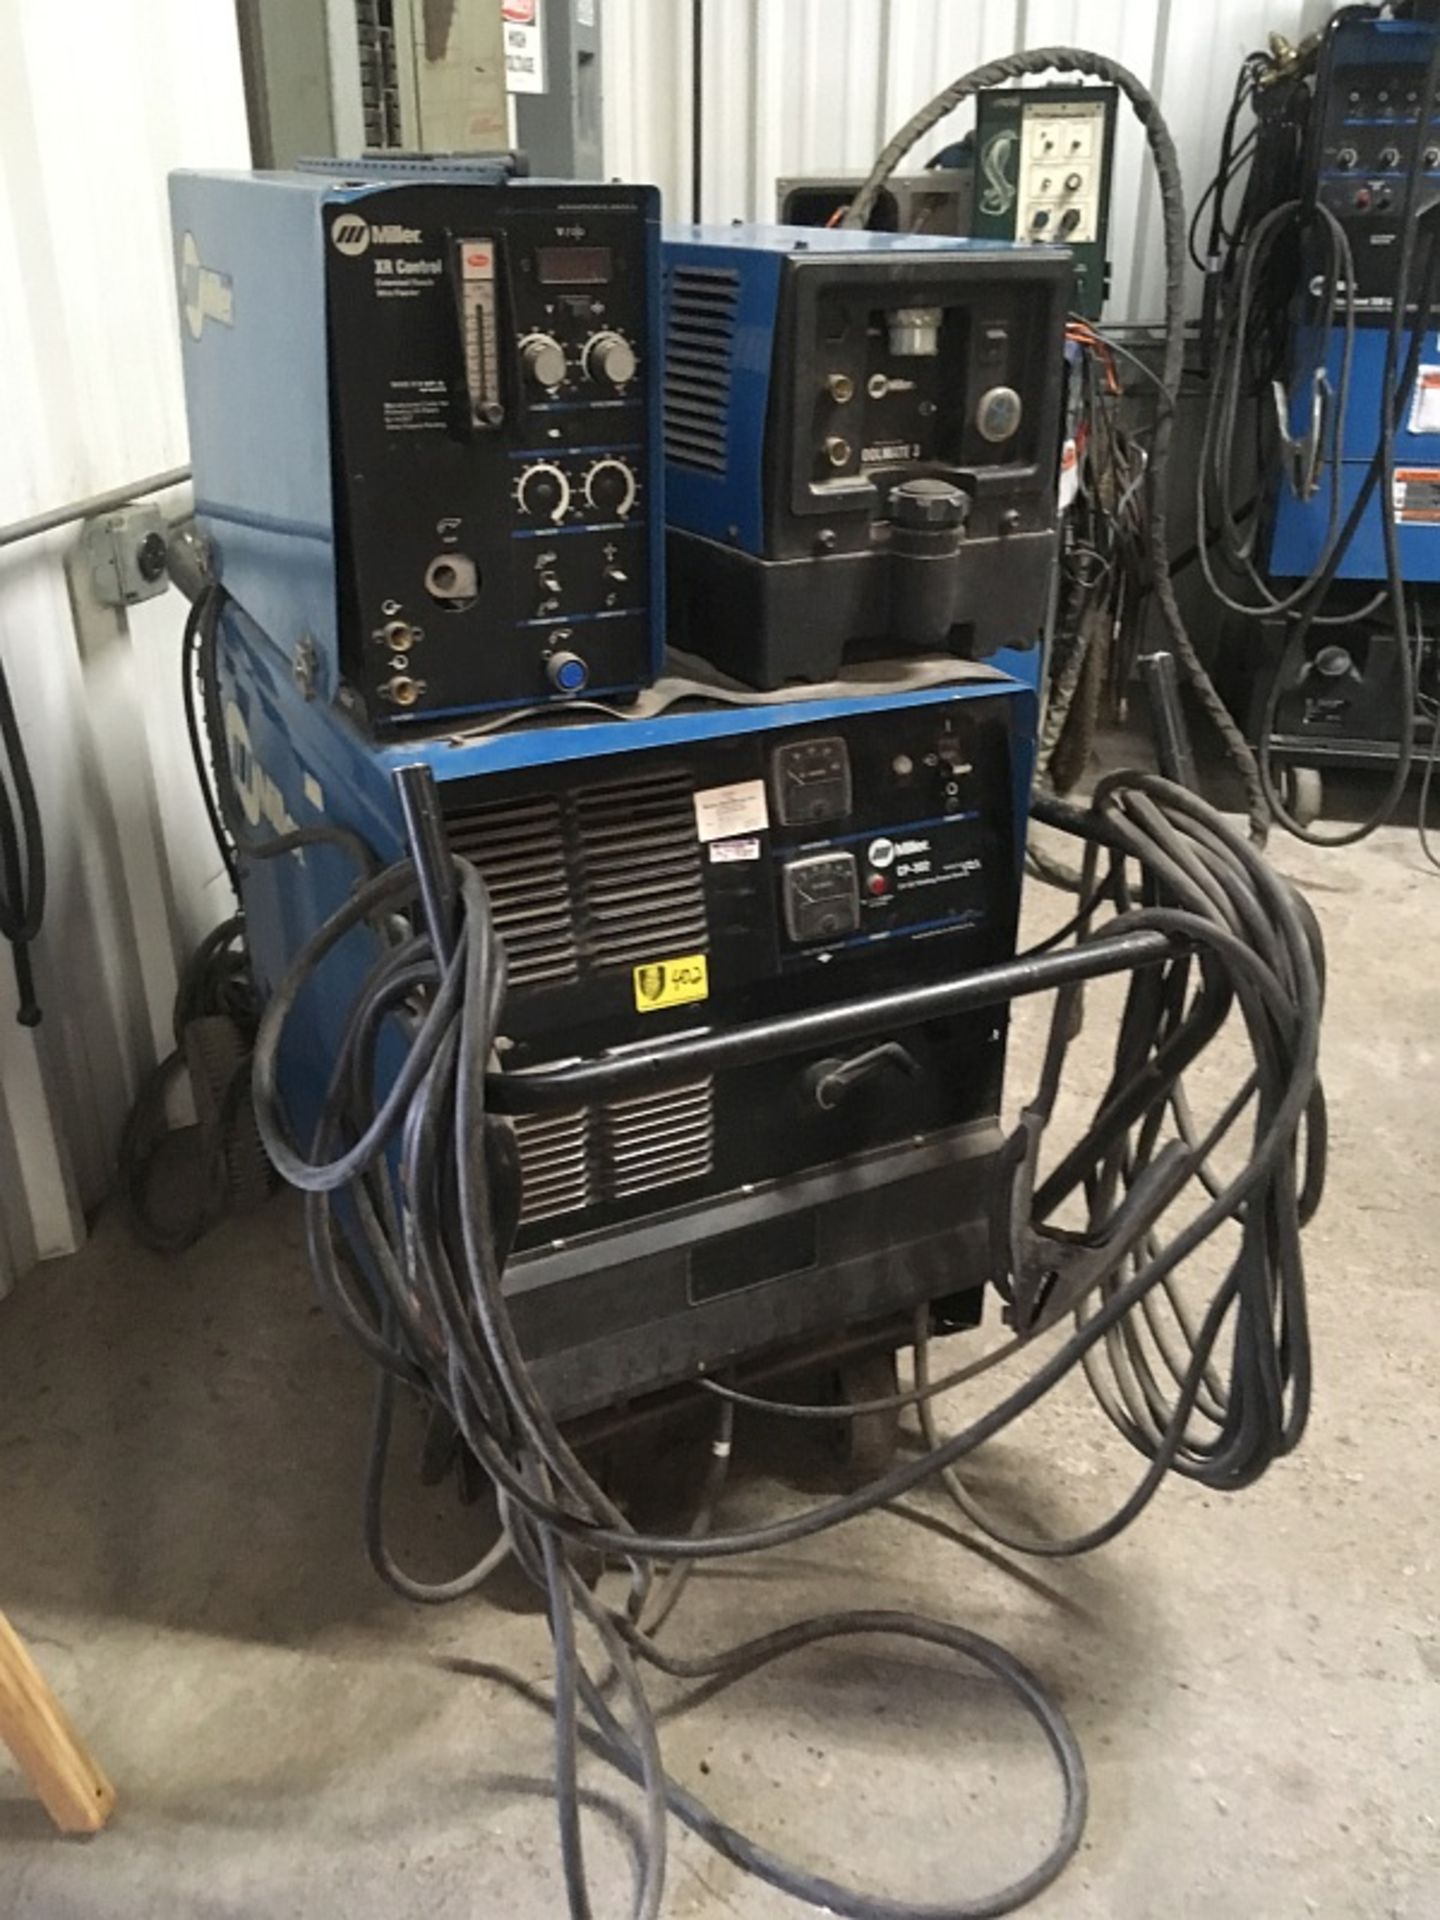 Millermatic CP302 Wire Welder, SN LC113949 w/ Coolmate 3, SN LC088R12 & XR Wire Feed Control, 3-